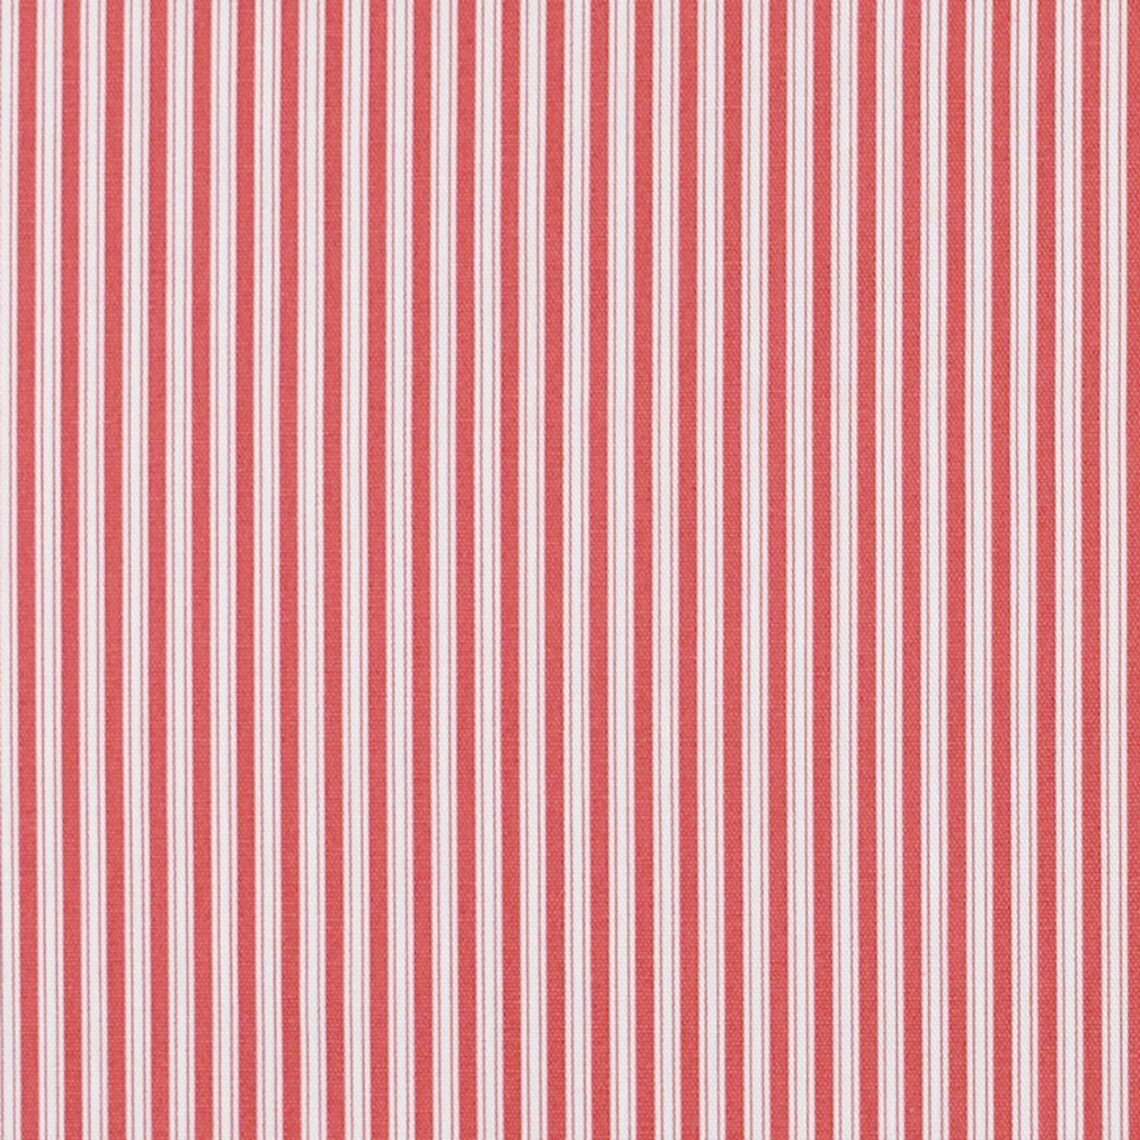 Tab Top Curtain Panels Pair in Polo Calypso Rose Red Stripe on Off-White